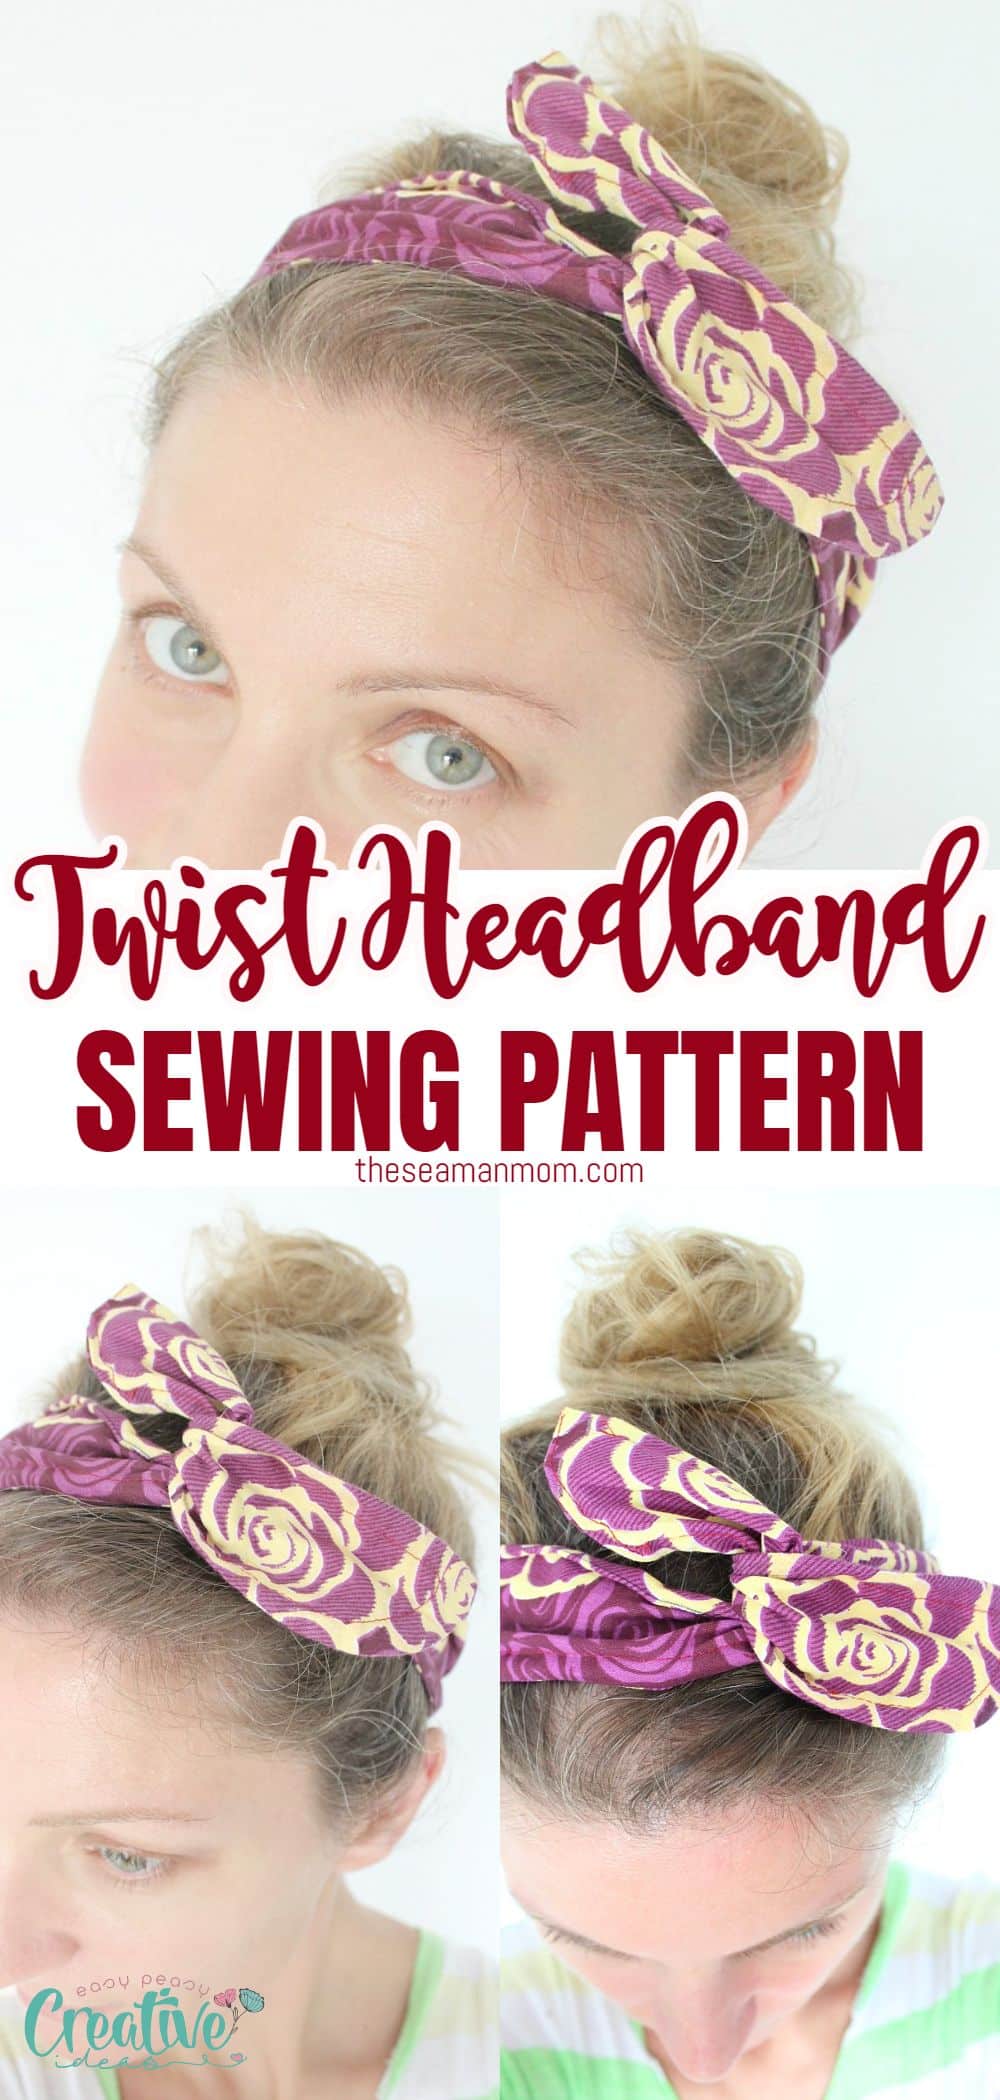 Want to improve your summer hairstyle? Check out this simple tutorial to learn how to make a cute and practical Twist Wire Headband in no time! Say goodbye to bad hair days. via @petroneagu